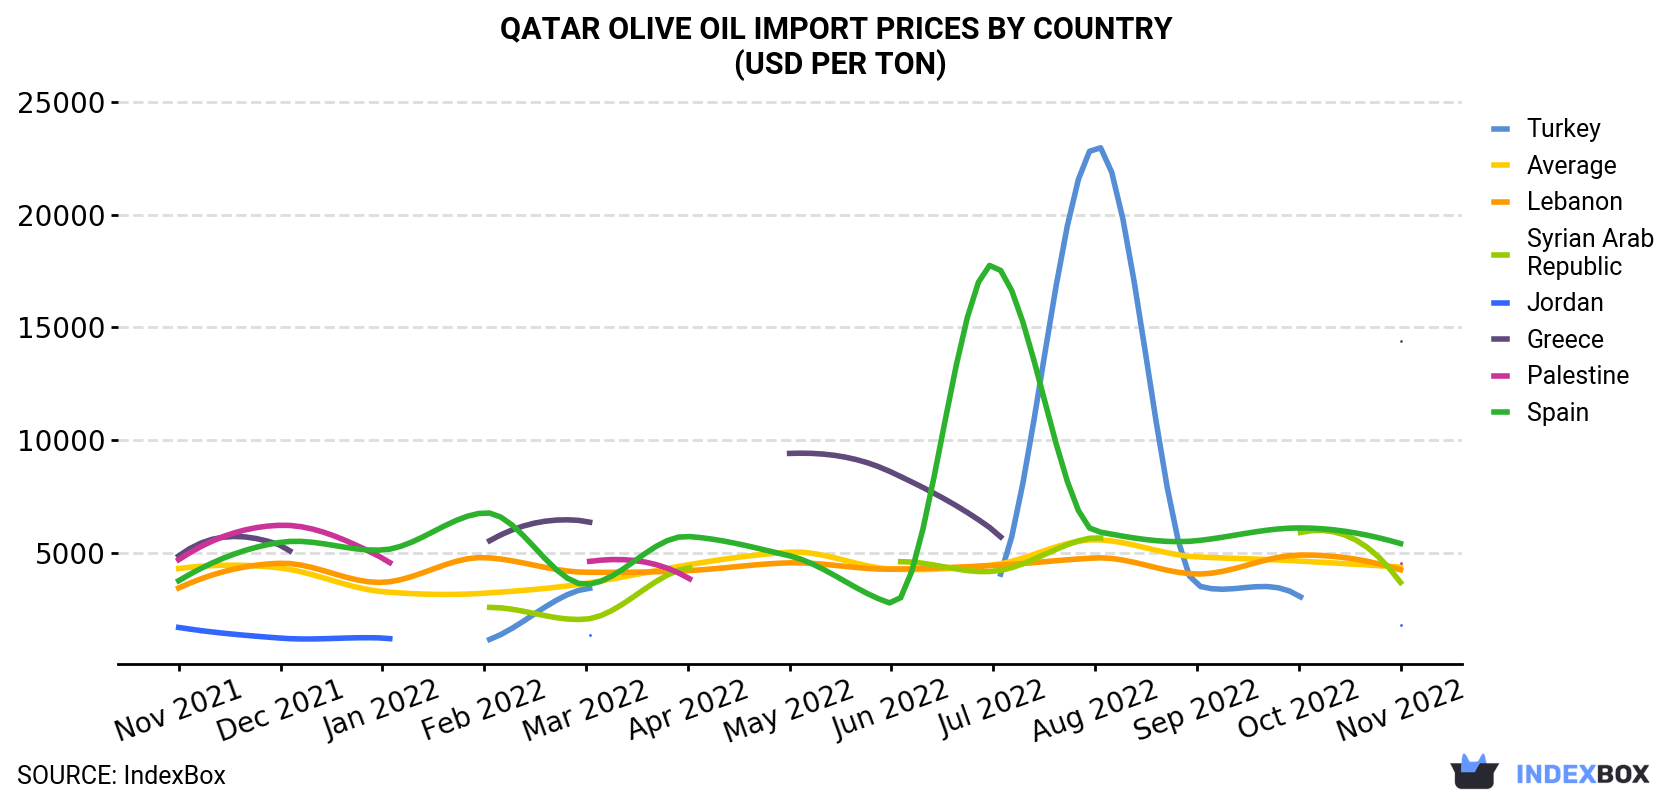 Qatar Olive Oil Import Prices By Country (USD Per Ton)